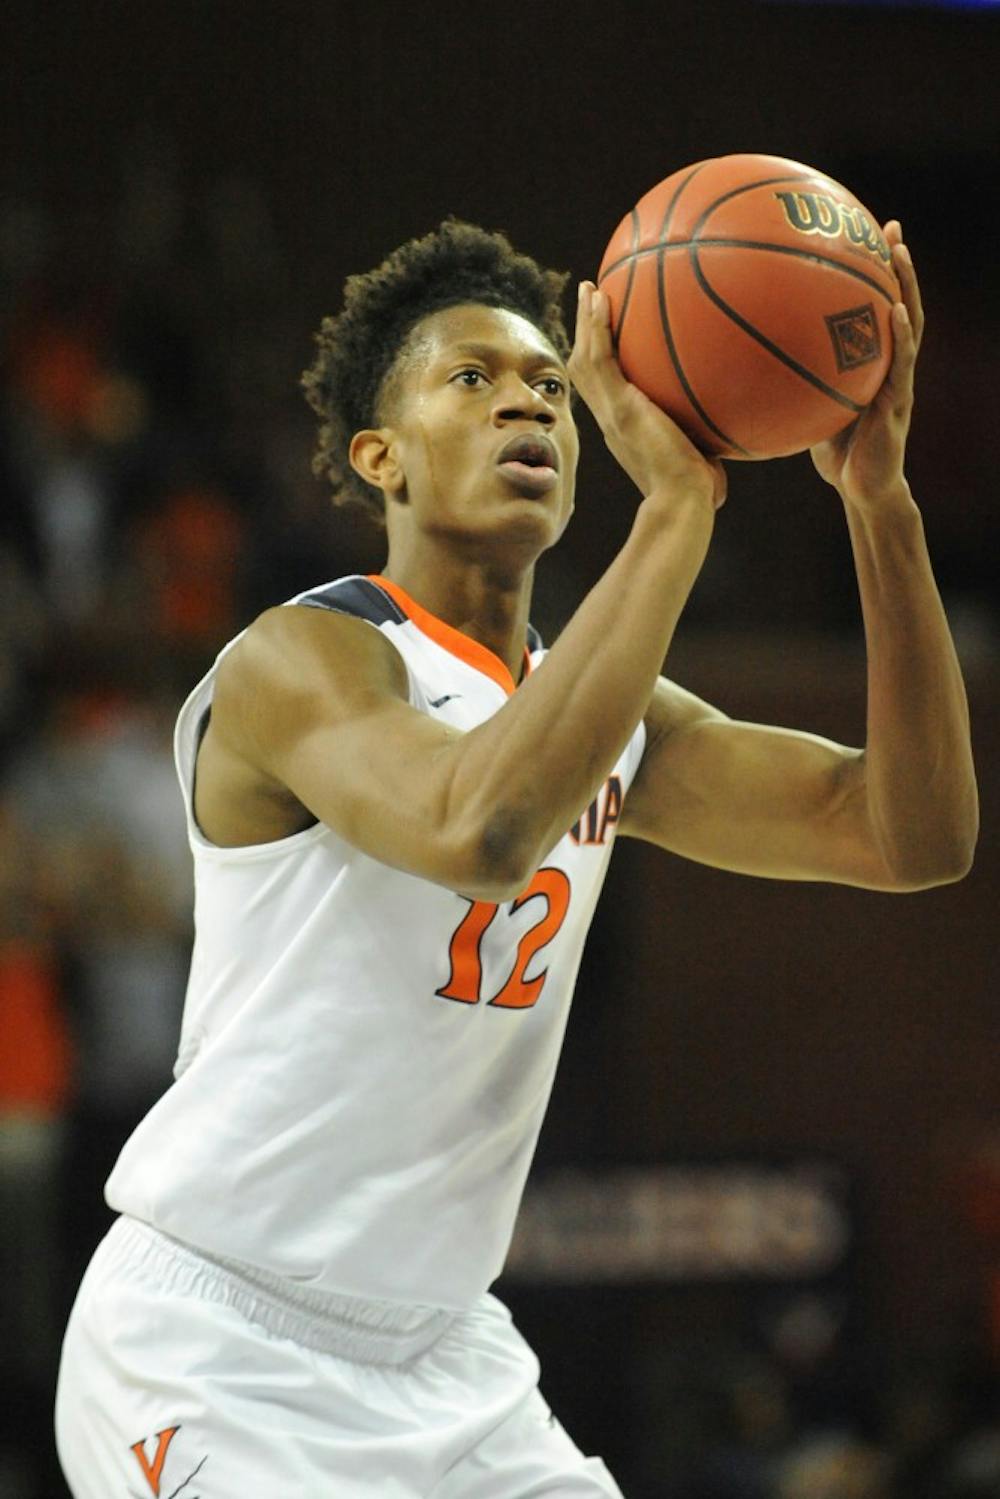 <p>Redshirt freshman guard De'Andre Hunter scored a career-high 23 points in Virginia's win over Monmouth. &nbsp;</p>